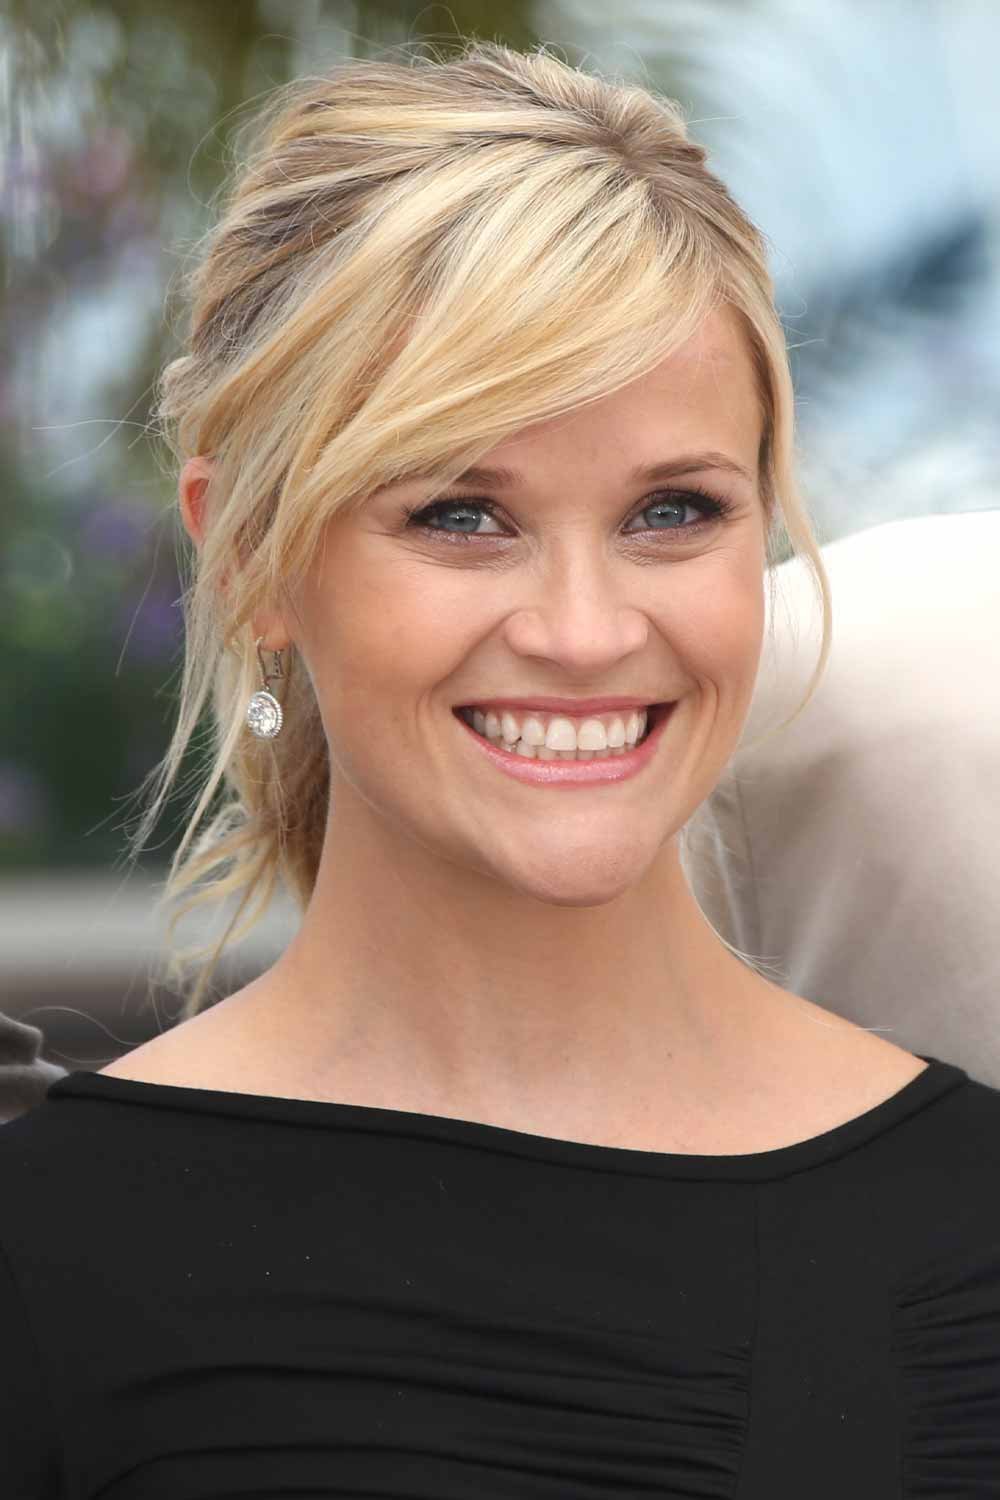 Reese Witherspoon with Side Blonde Bangs